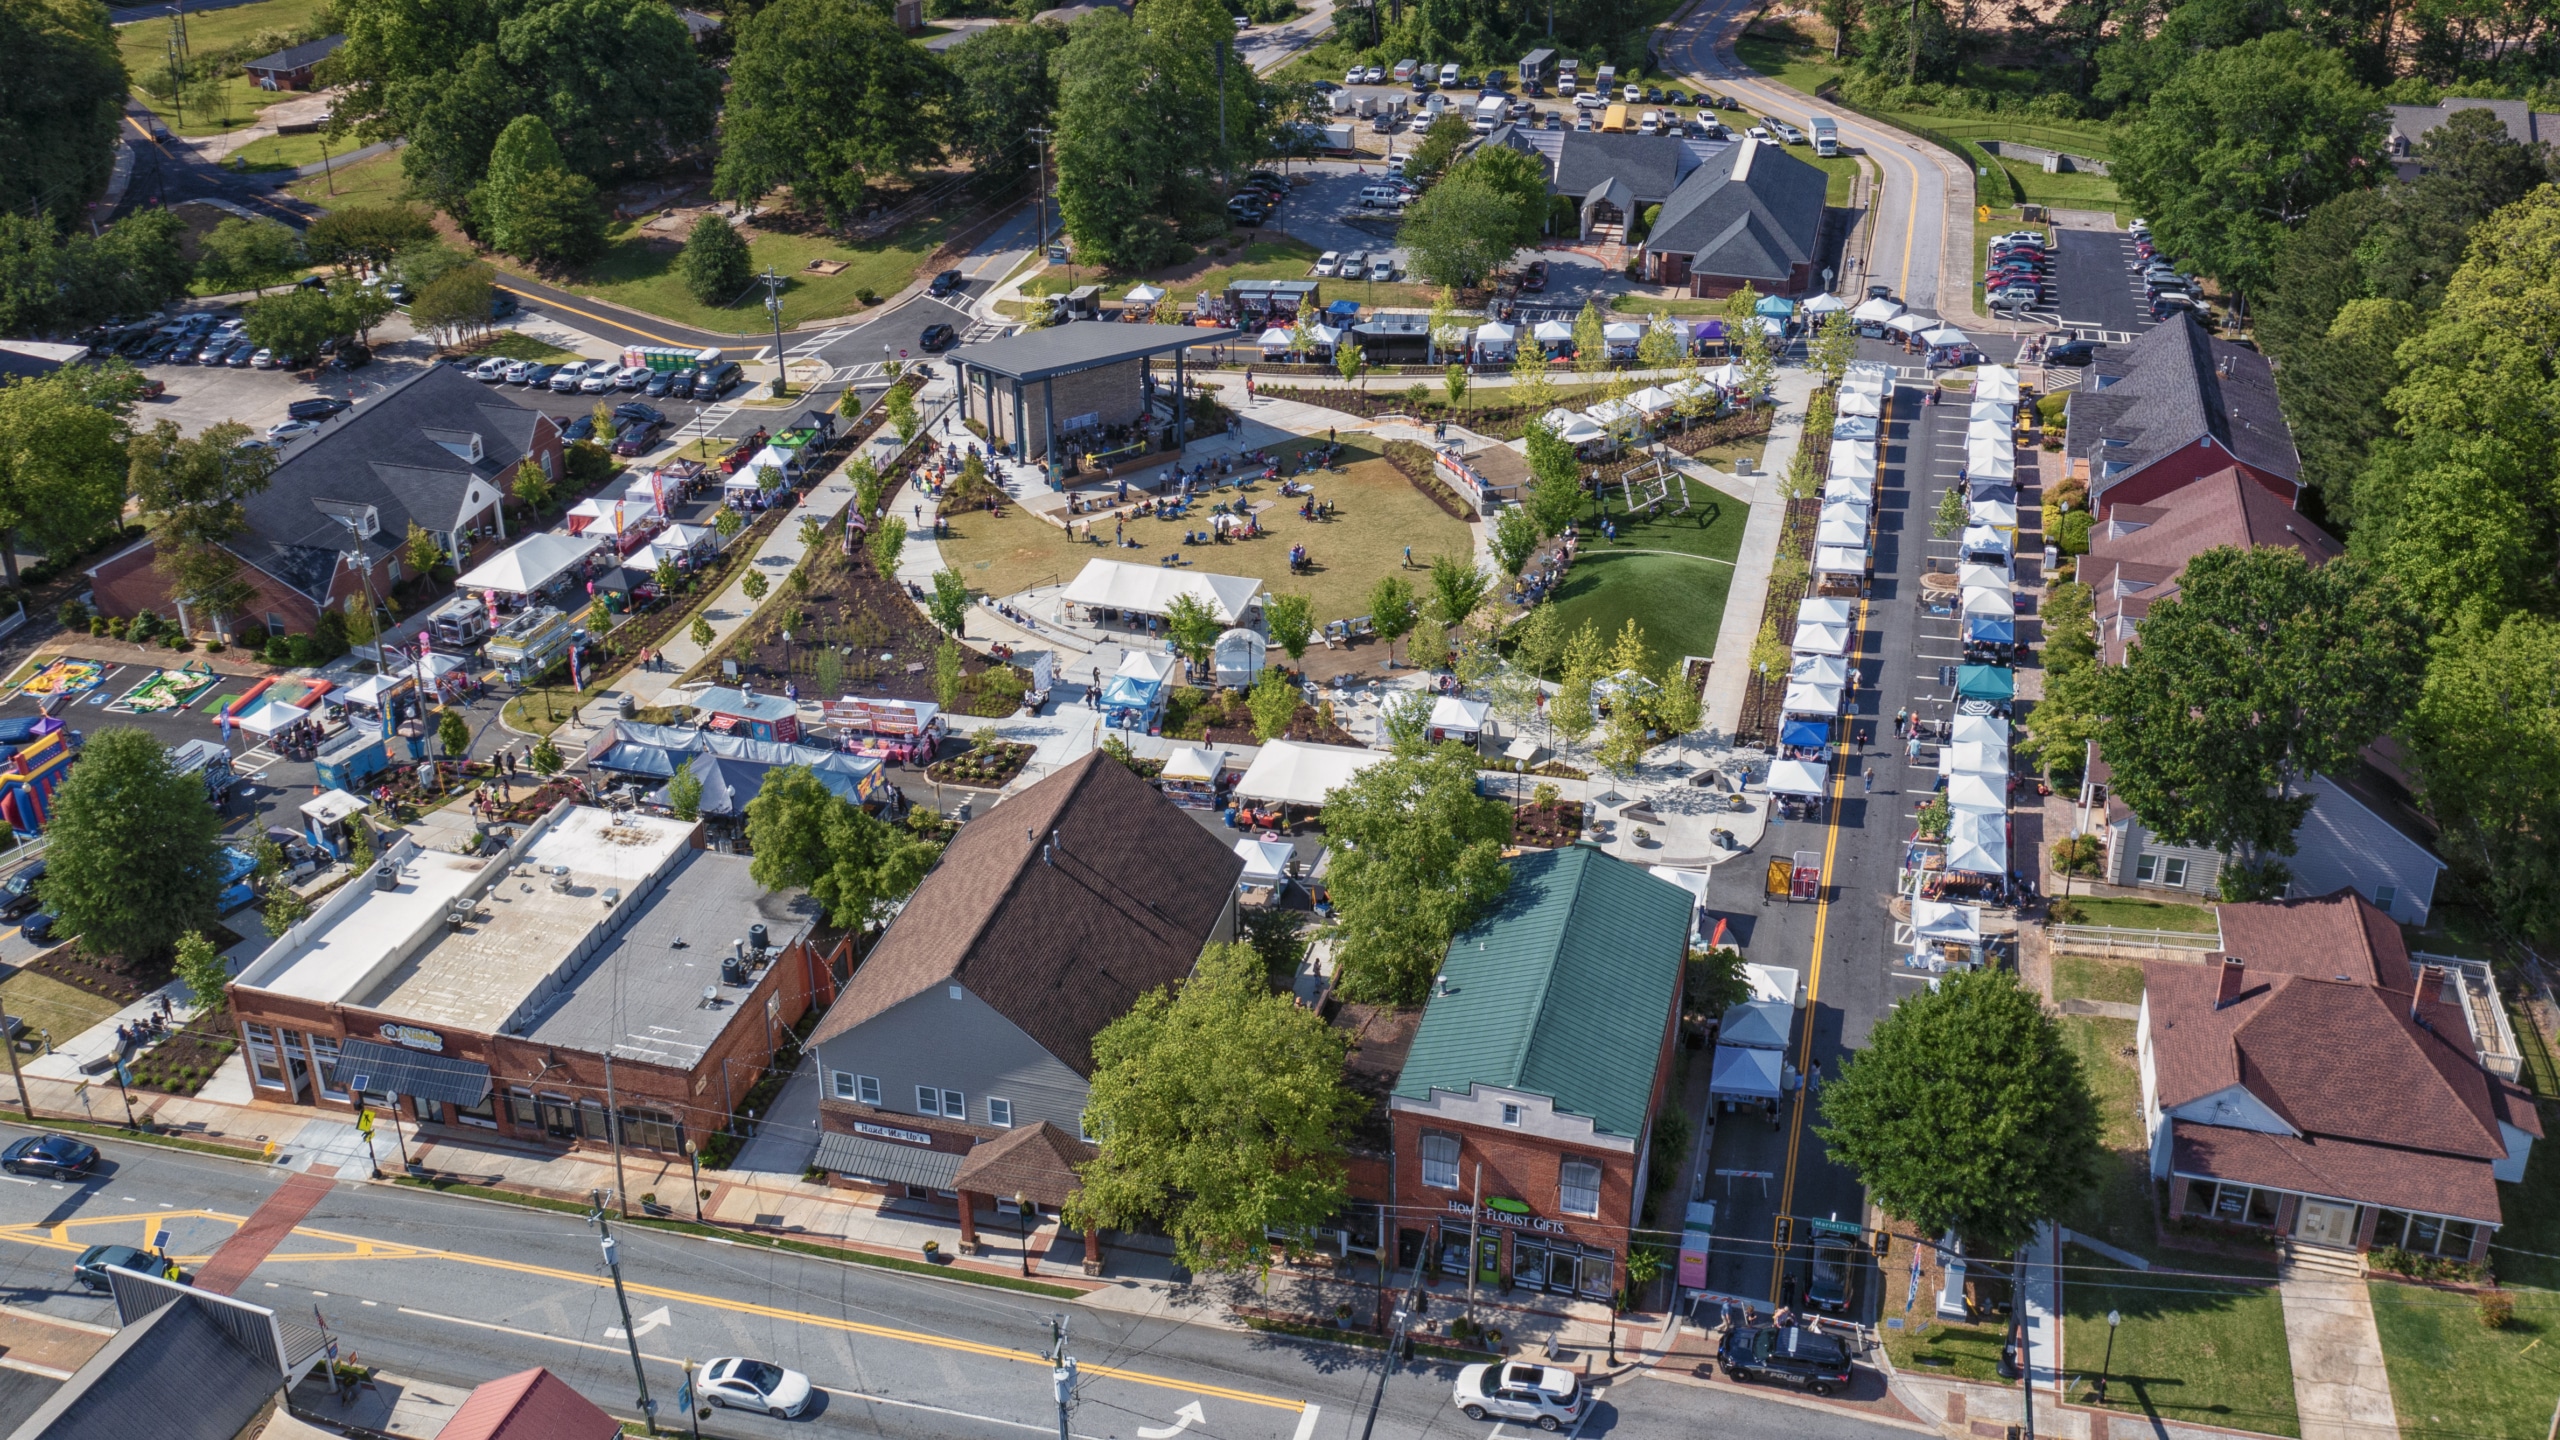 Powder Springs Town Green Grand Opening as seen from above. Drone shot by David Lintott, May 2021